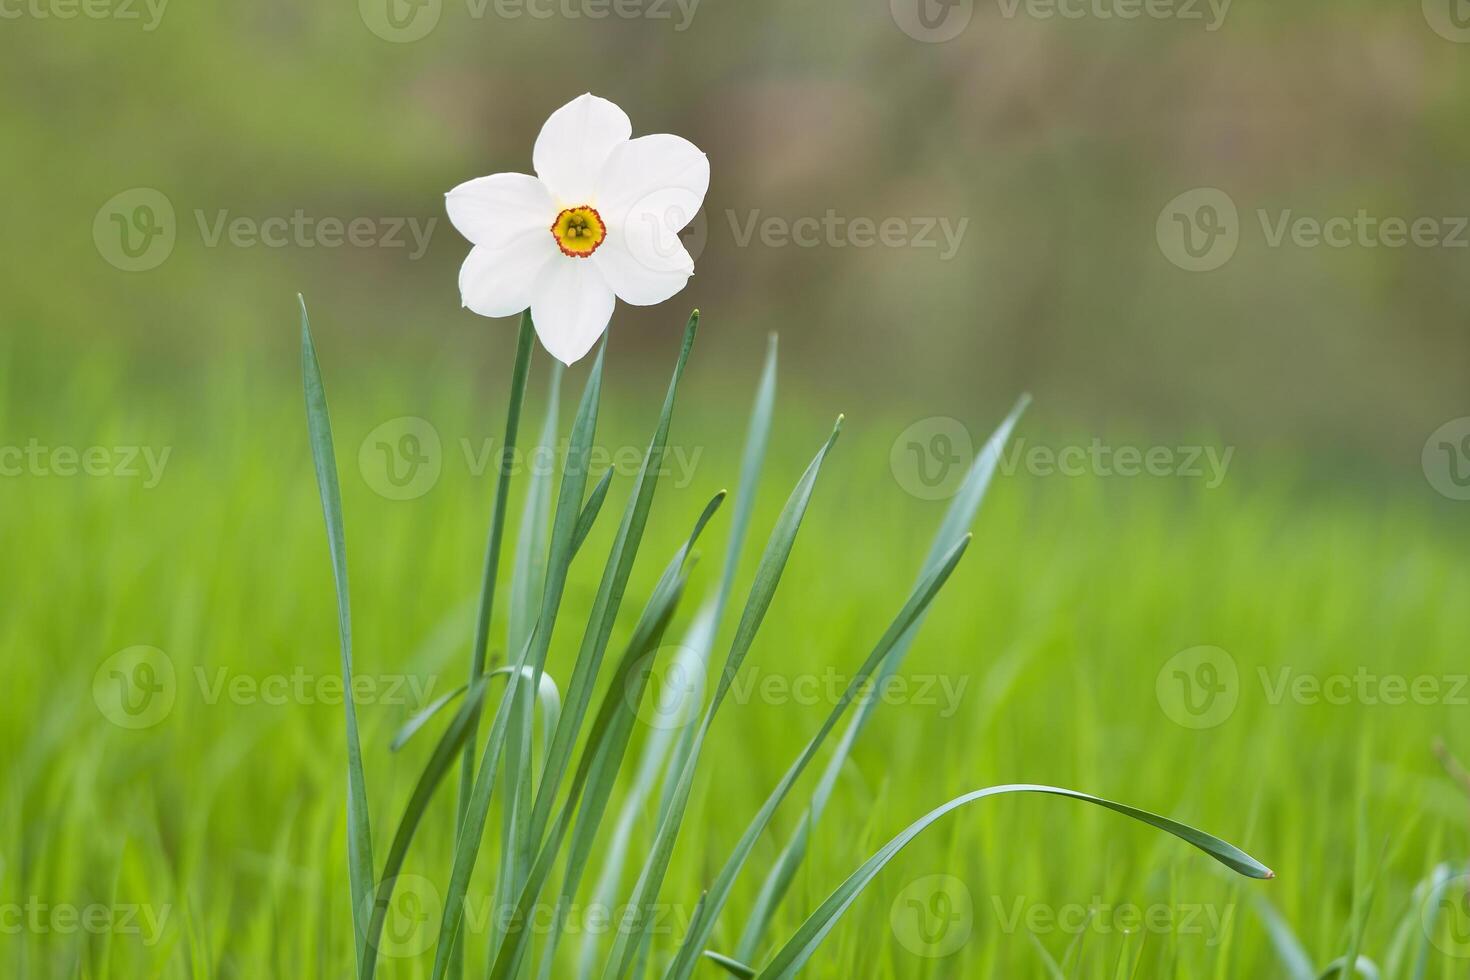 Daffodils at Easter time on a meadow. Yellow white flowers shine against the grass photo